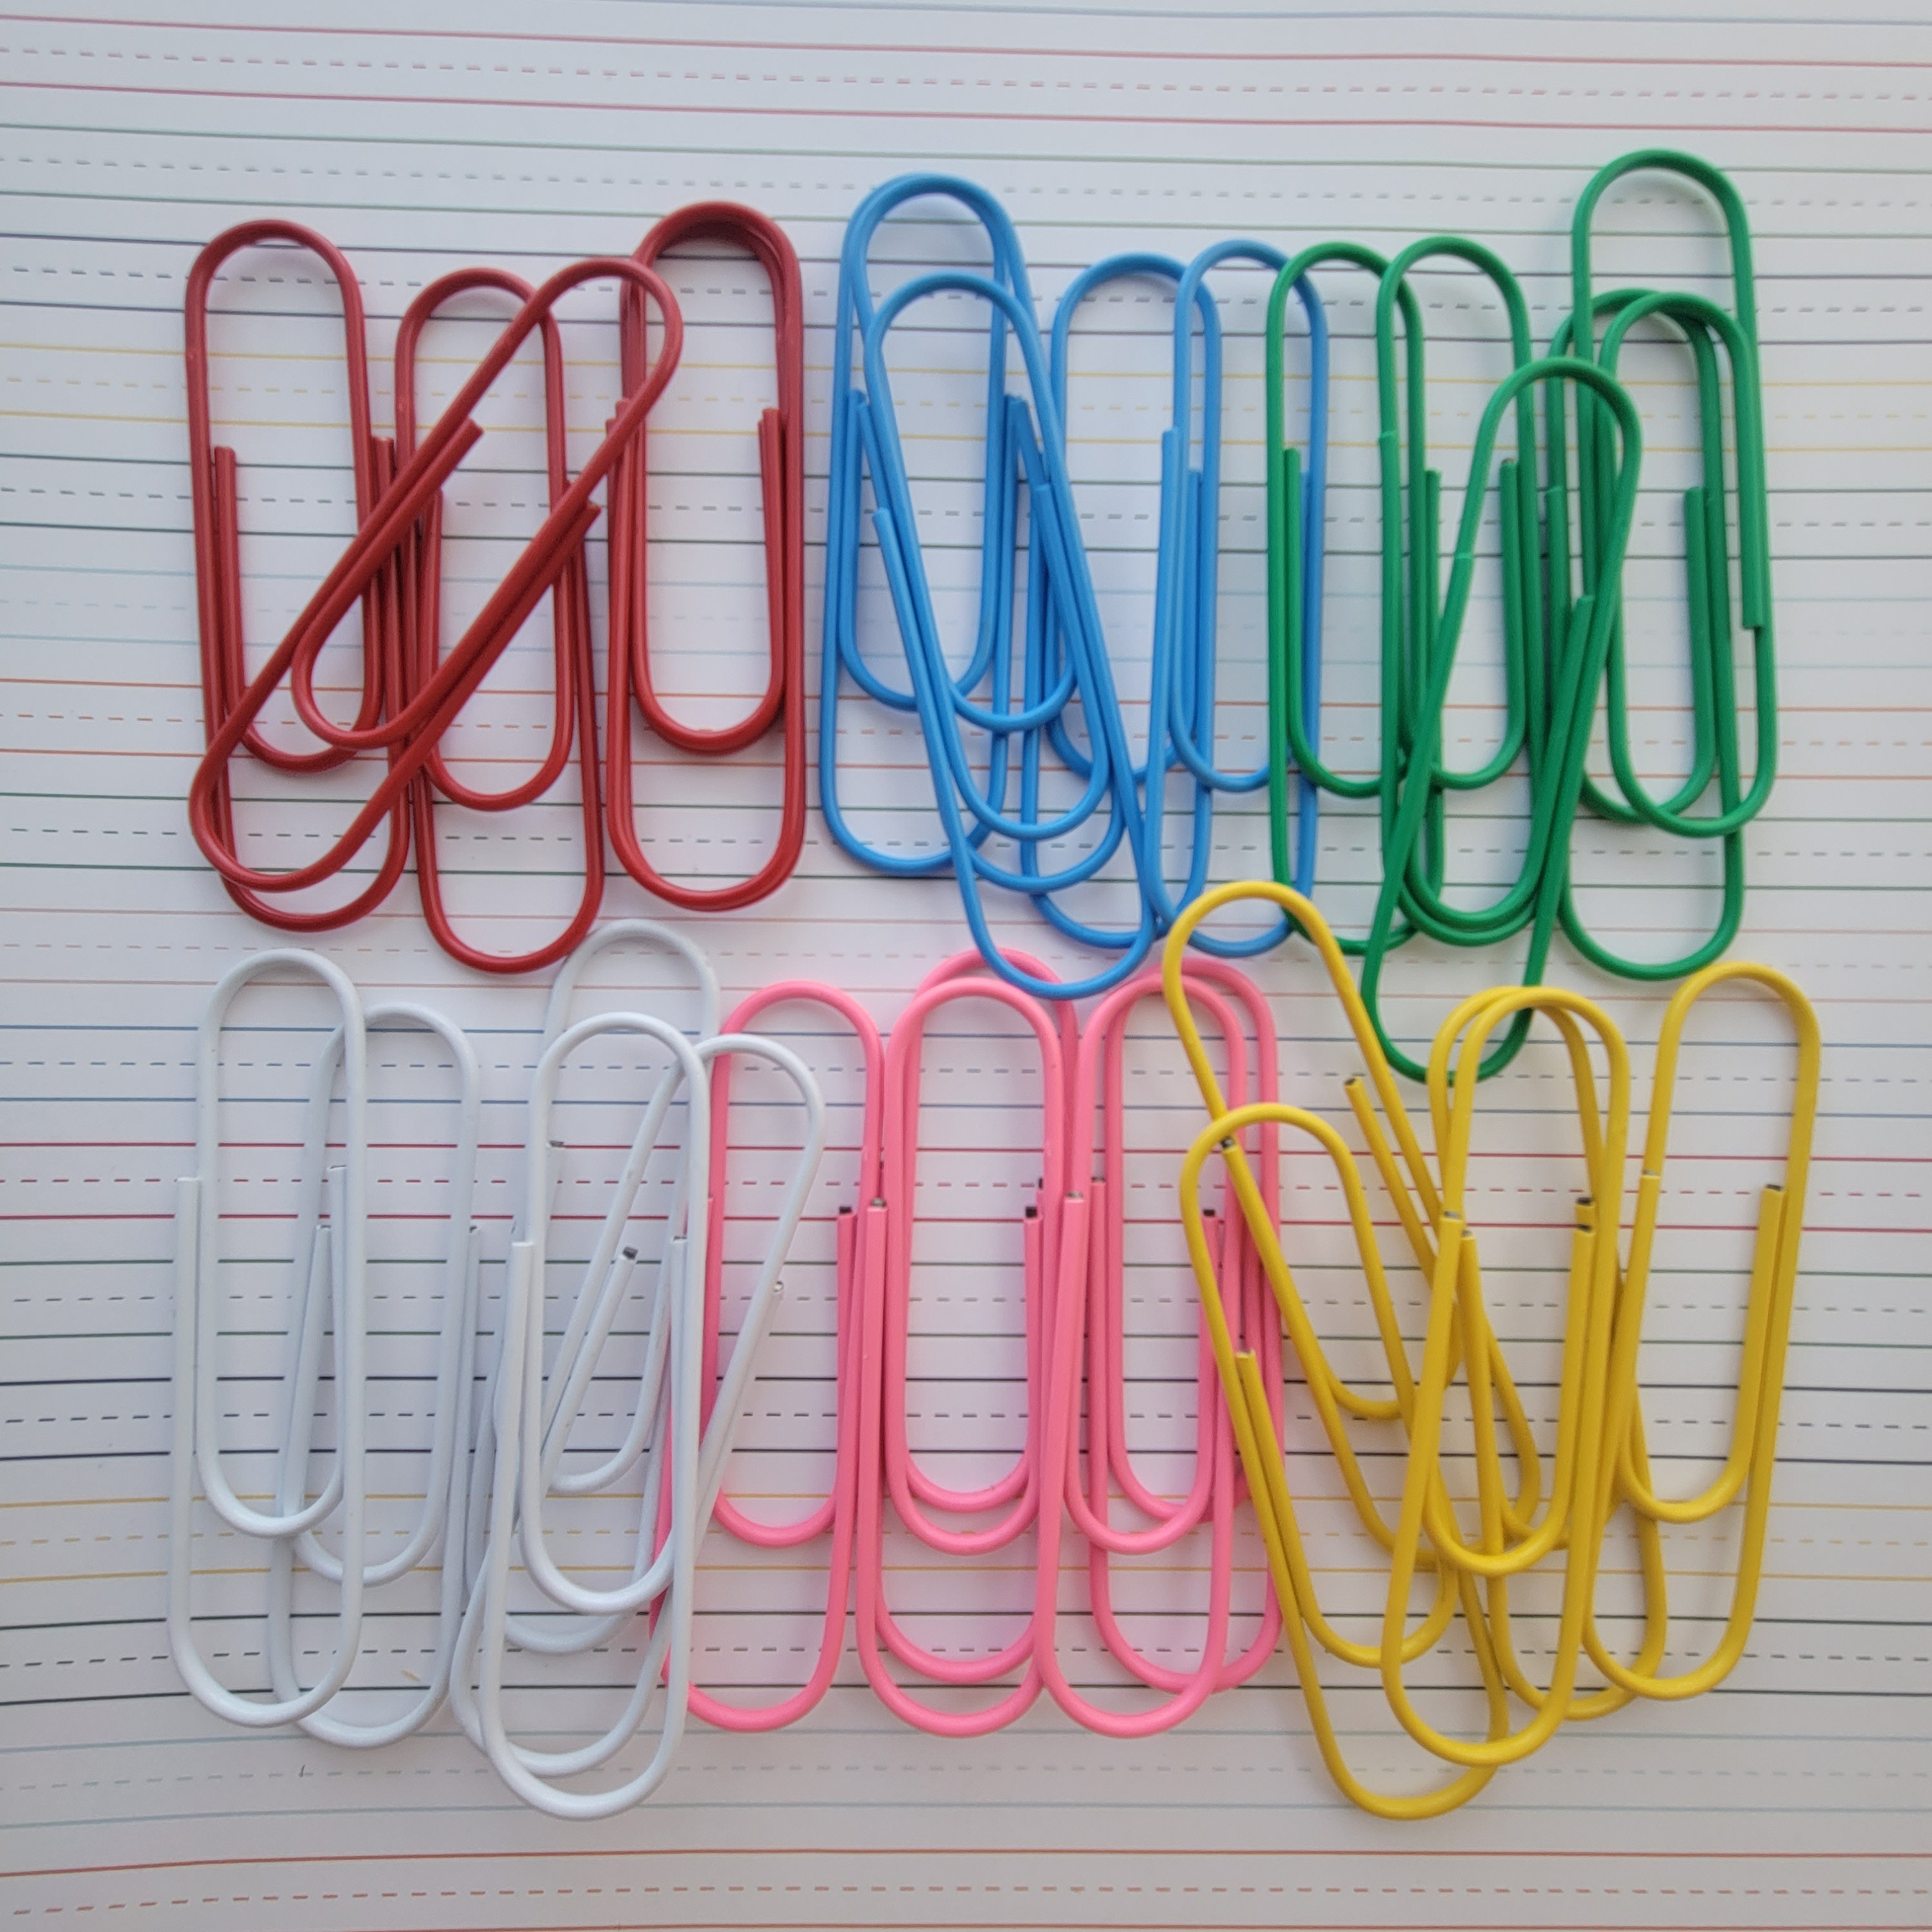 100 SILVER Large Paper Clip Bookmarkers With Glue Pad 3 1/2 Inch SEE COUPON  